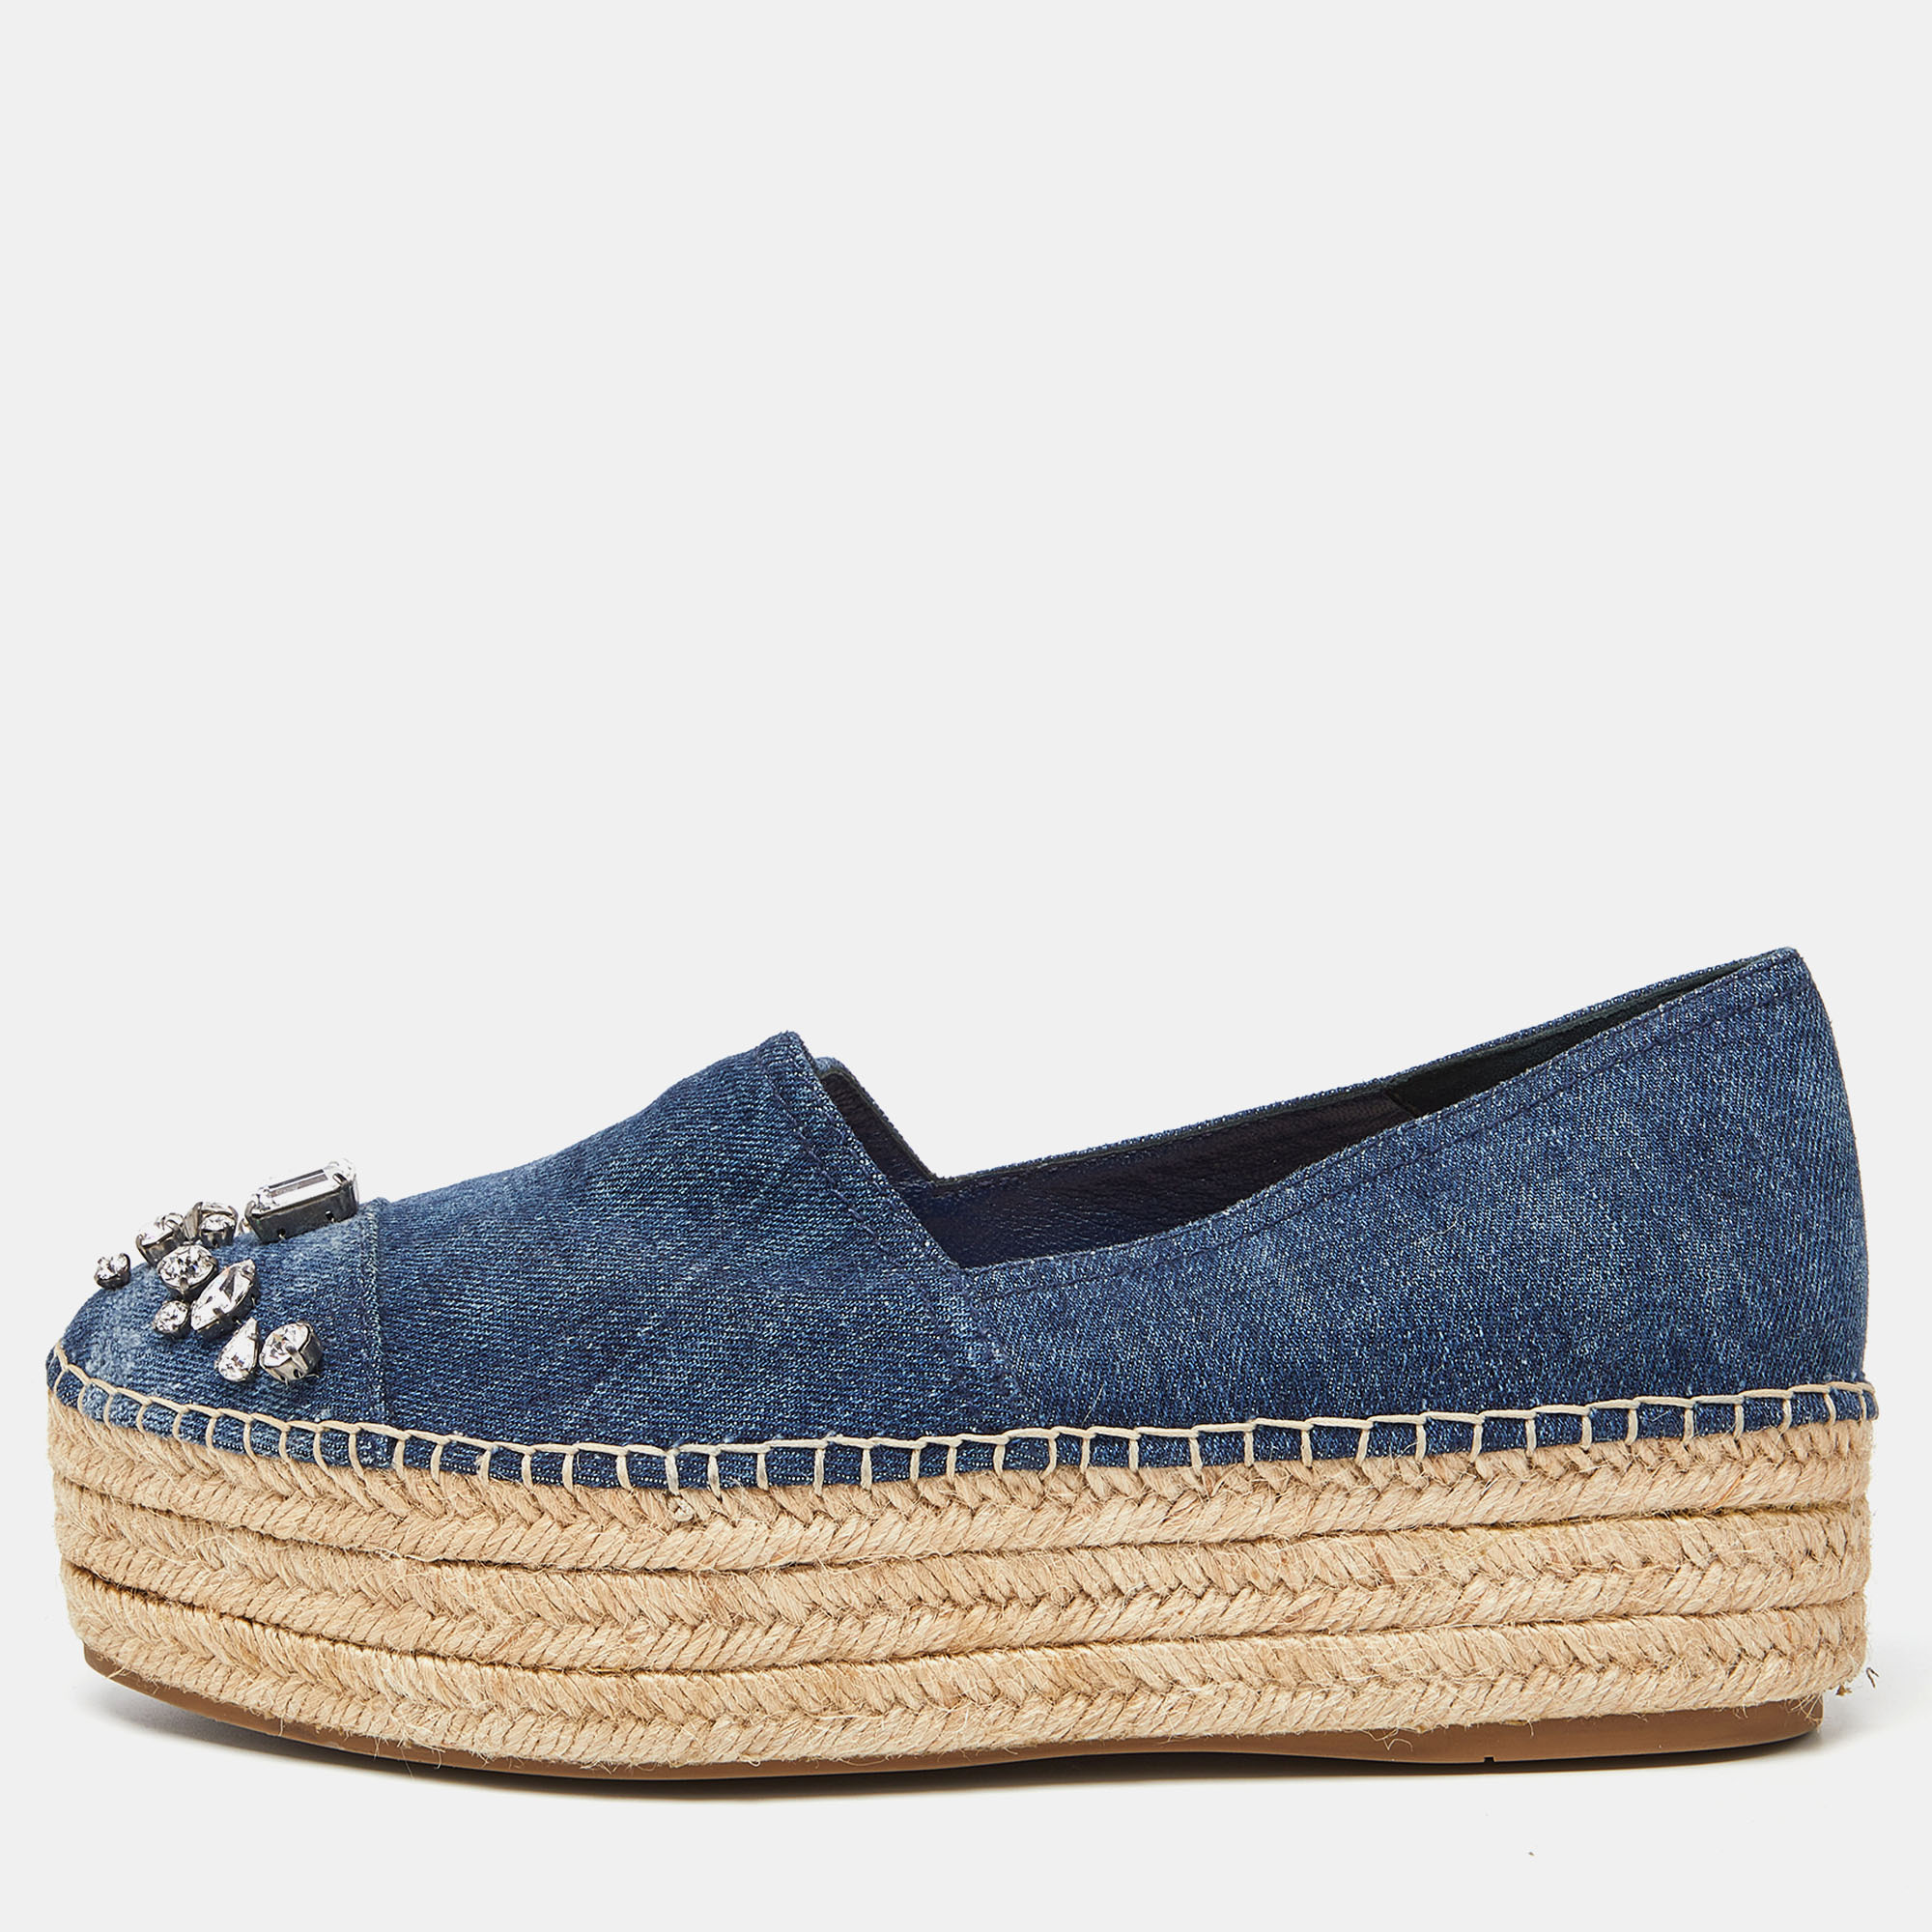 Espadrilles are not just stylish but also comfy and easy to wear. This lovely pair of Miu Miu espadrilles will accompany a casual outfit to perfection. The blue shoes are made of denim and designed with sturdy braided platforms as well as crystal embellishments on the cap toes.